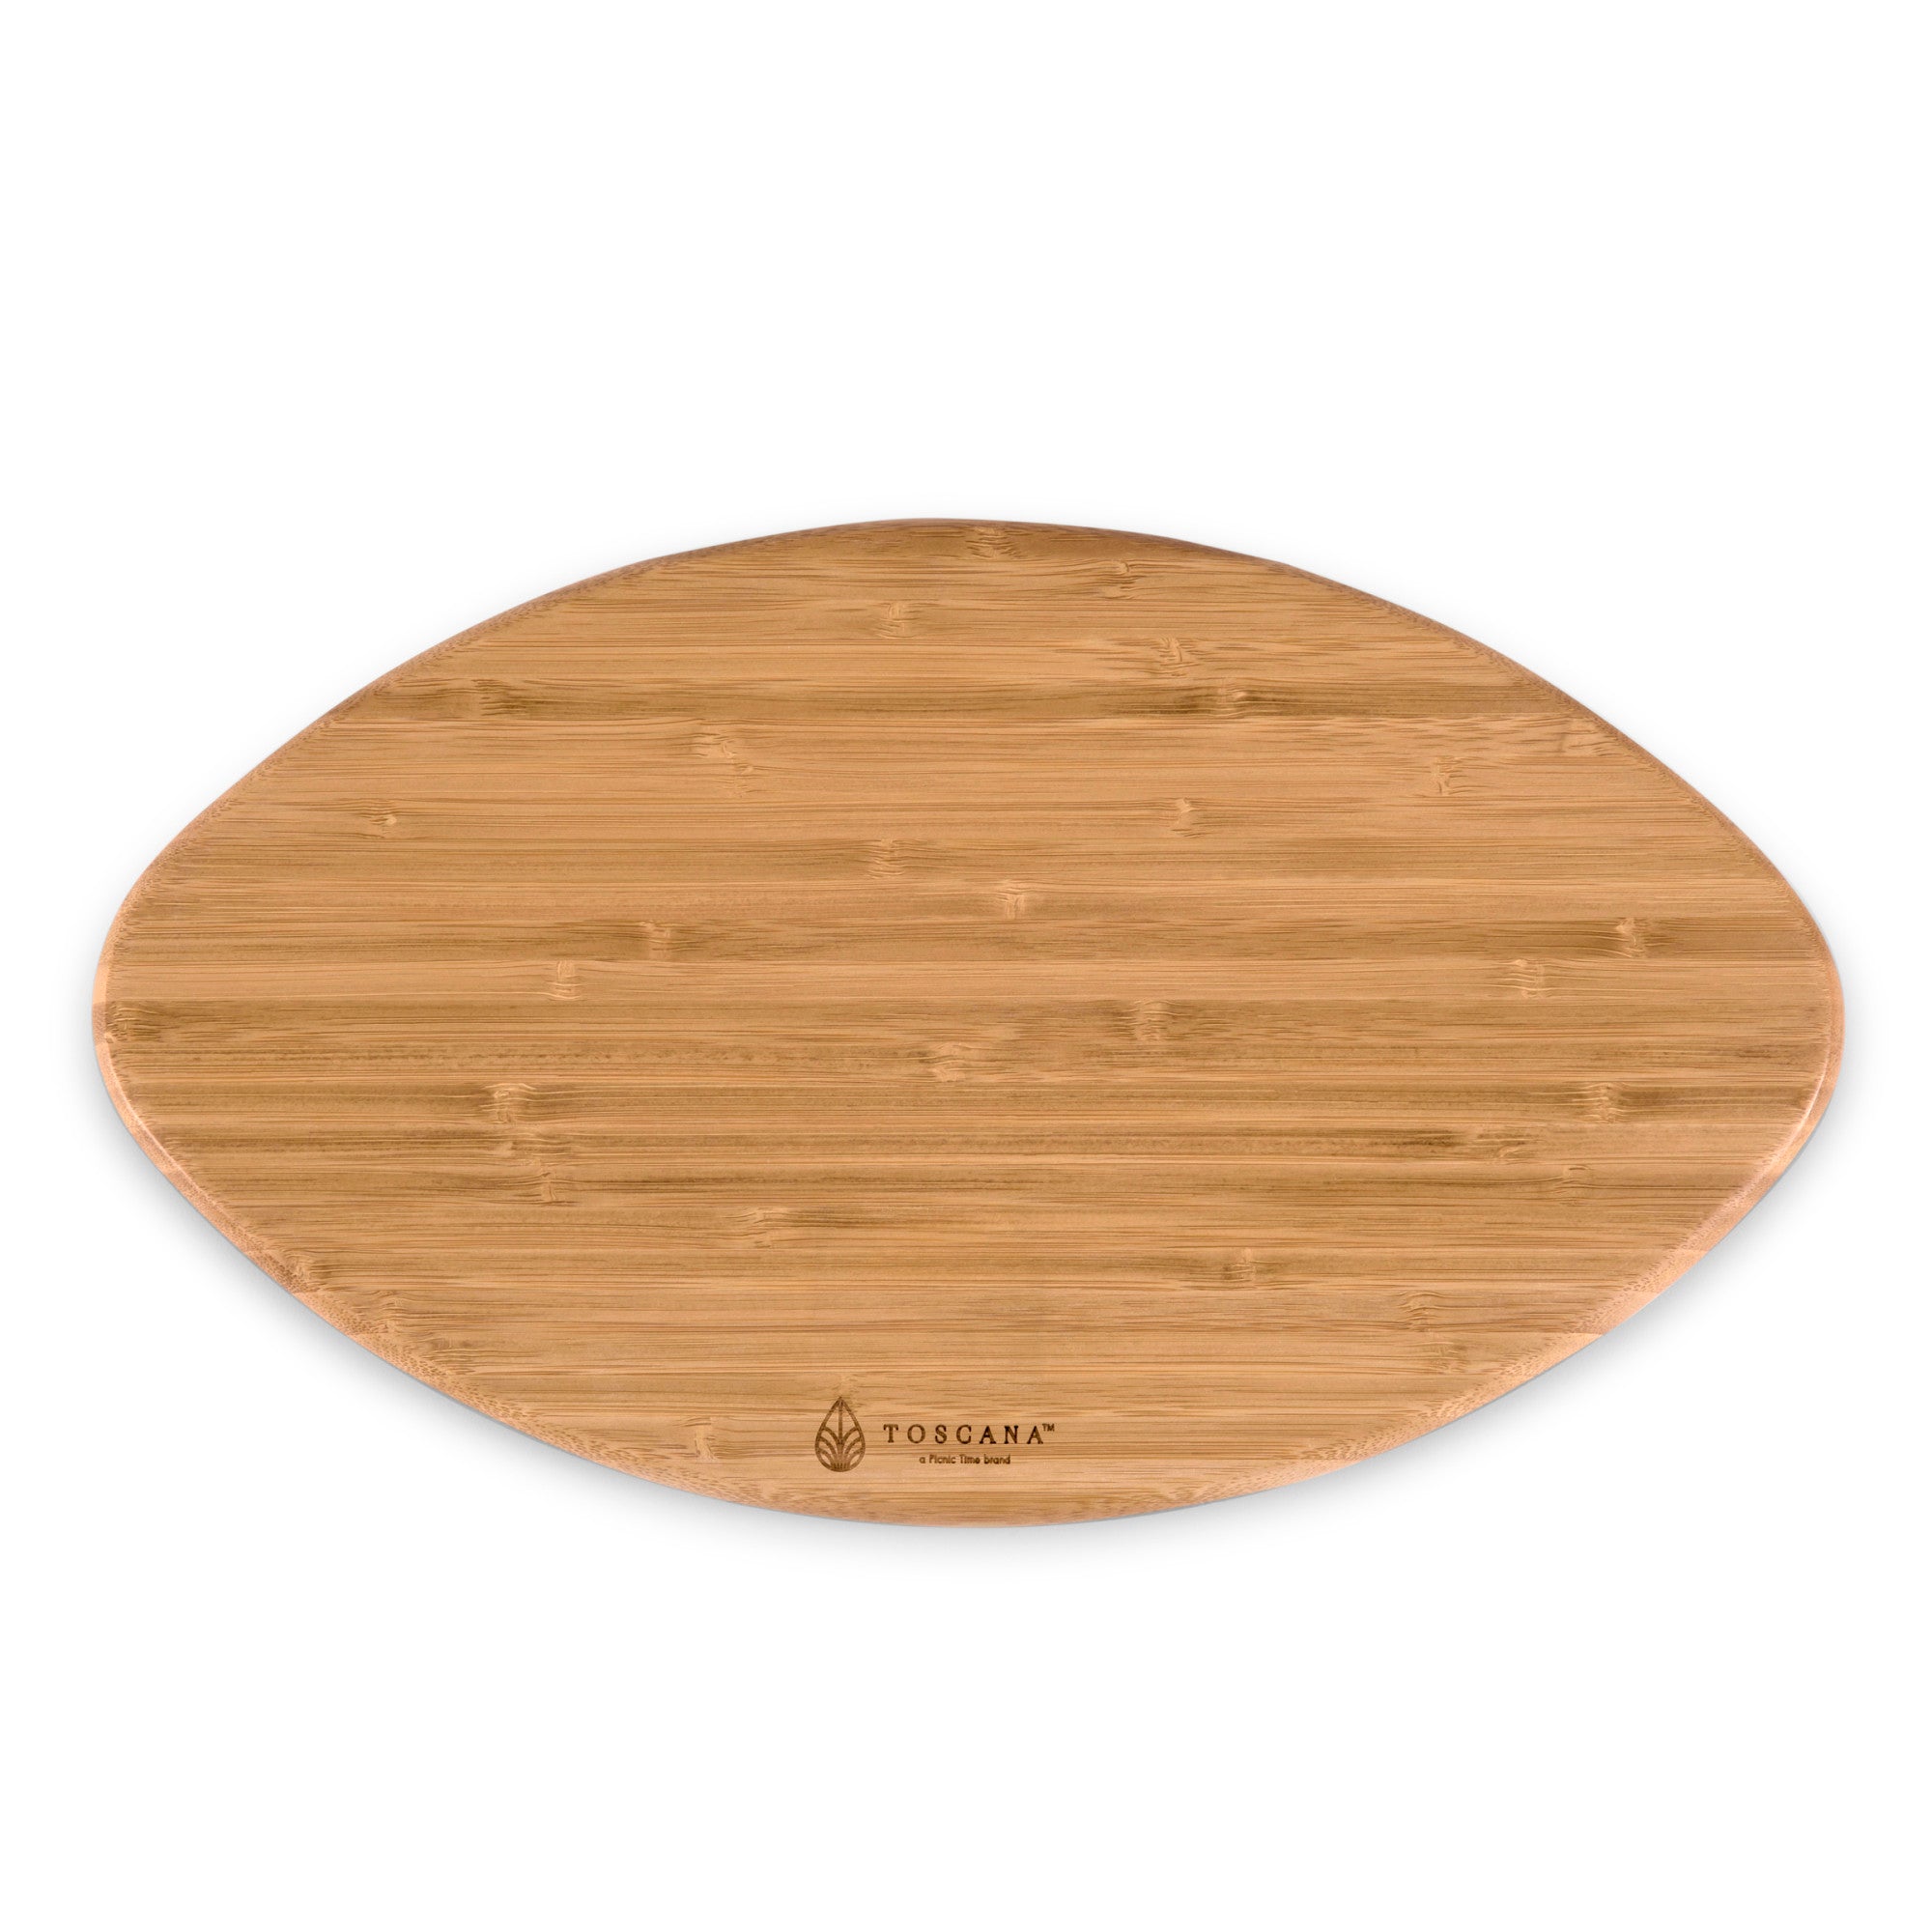 Wyoming Cowboys - Touchdown! Football Cutting Board & Serving Tray